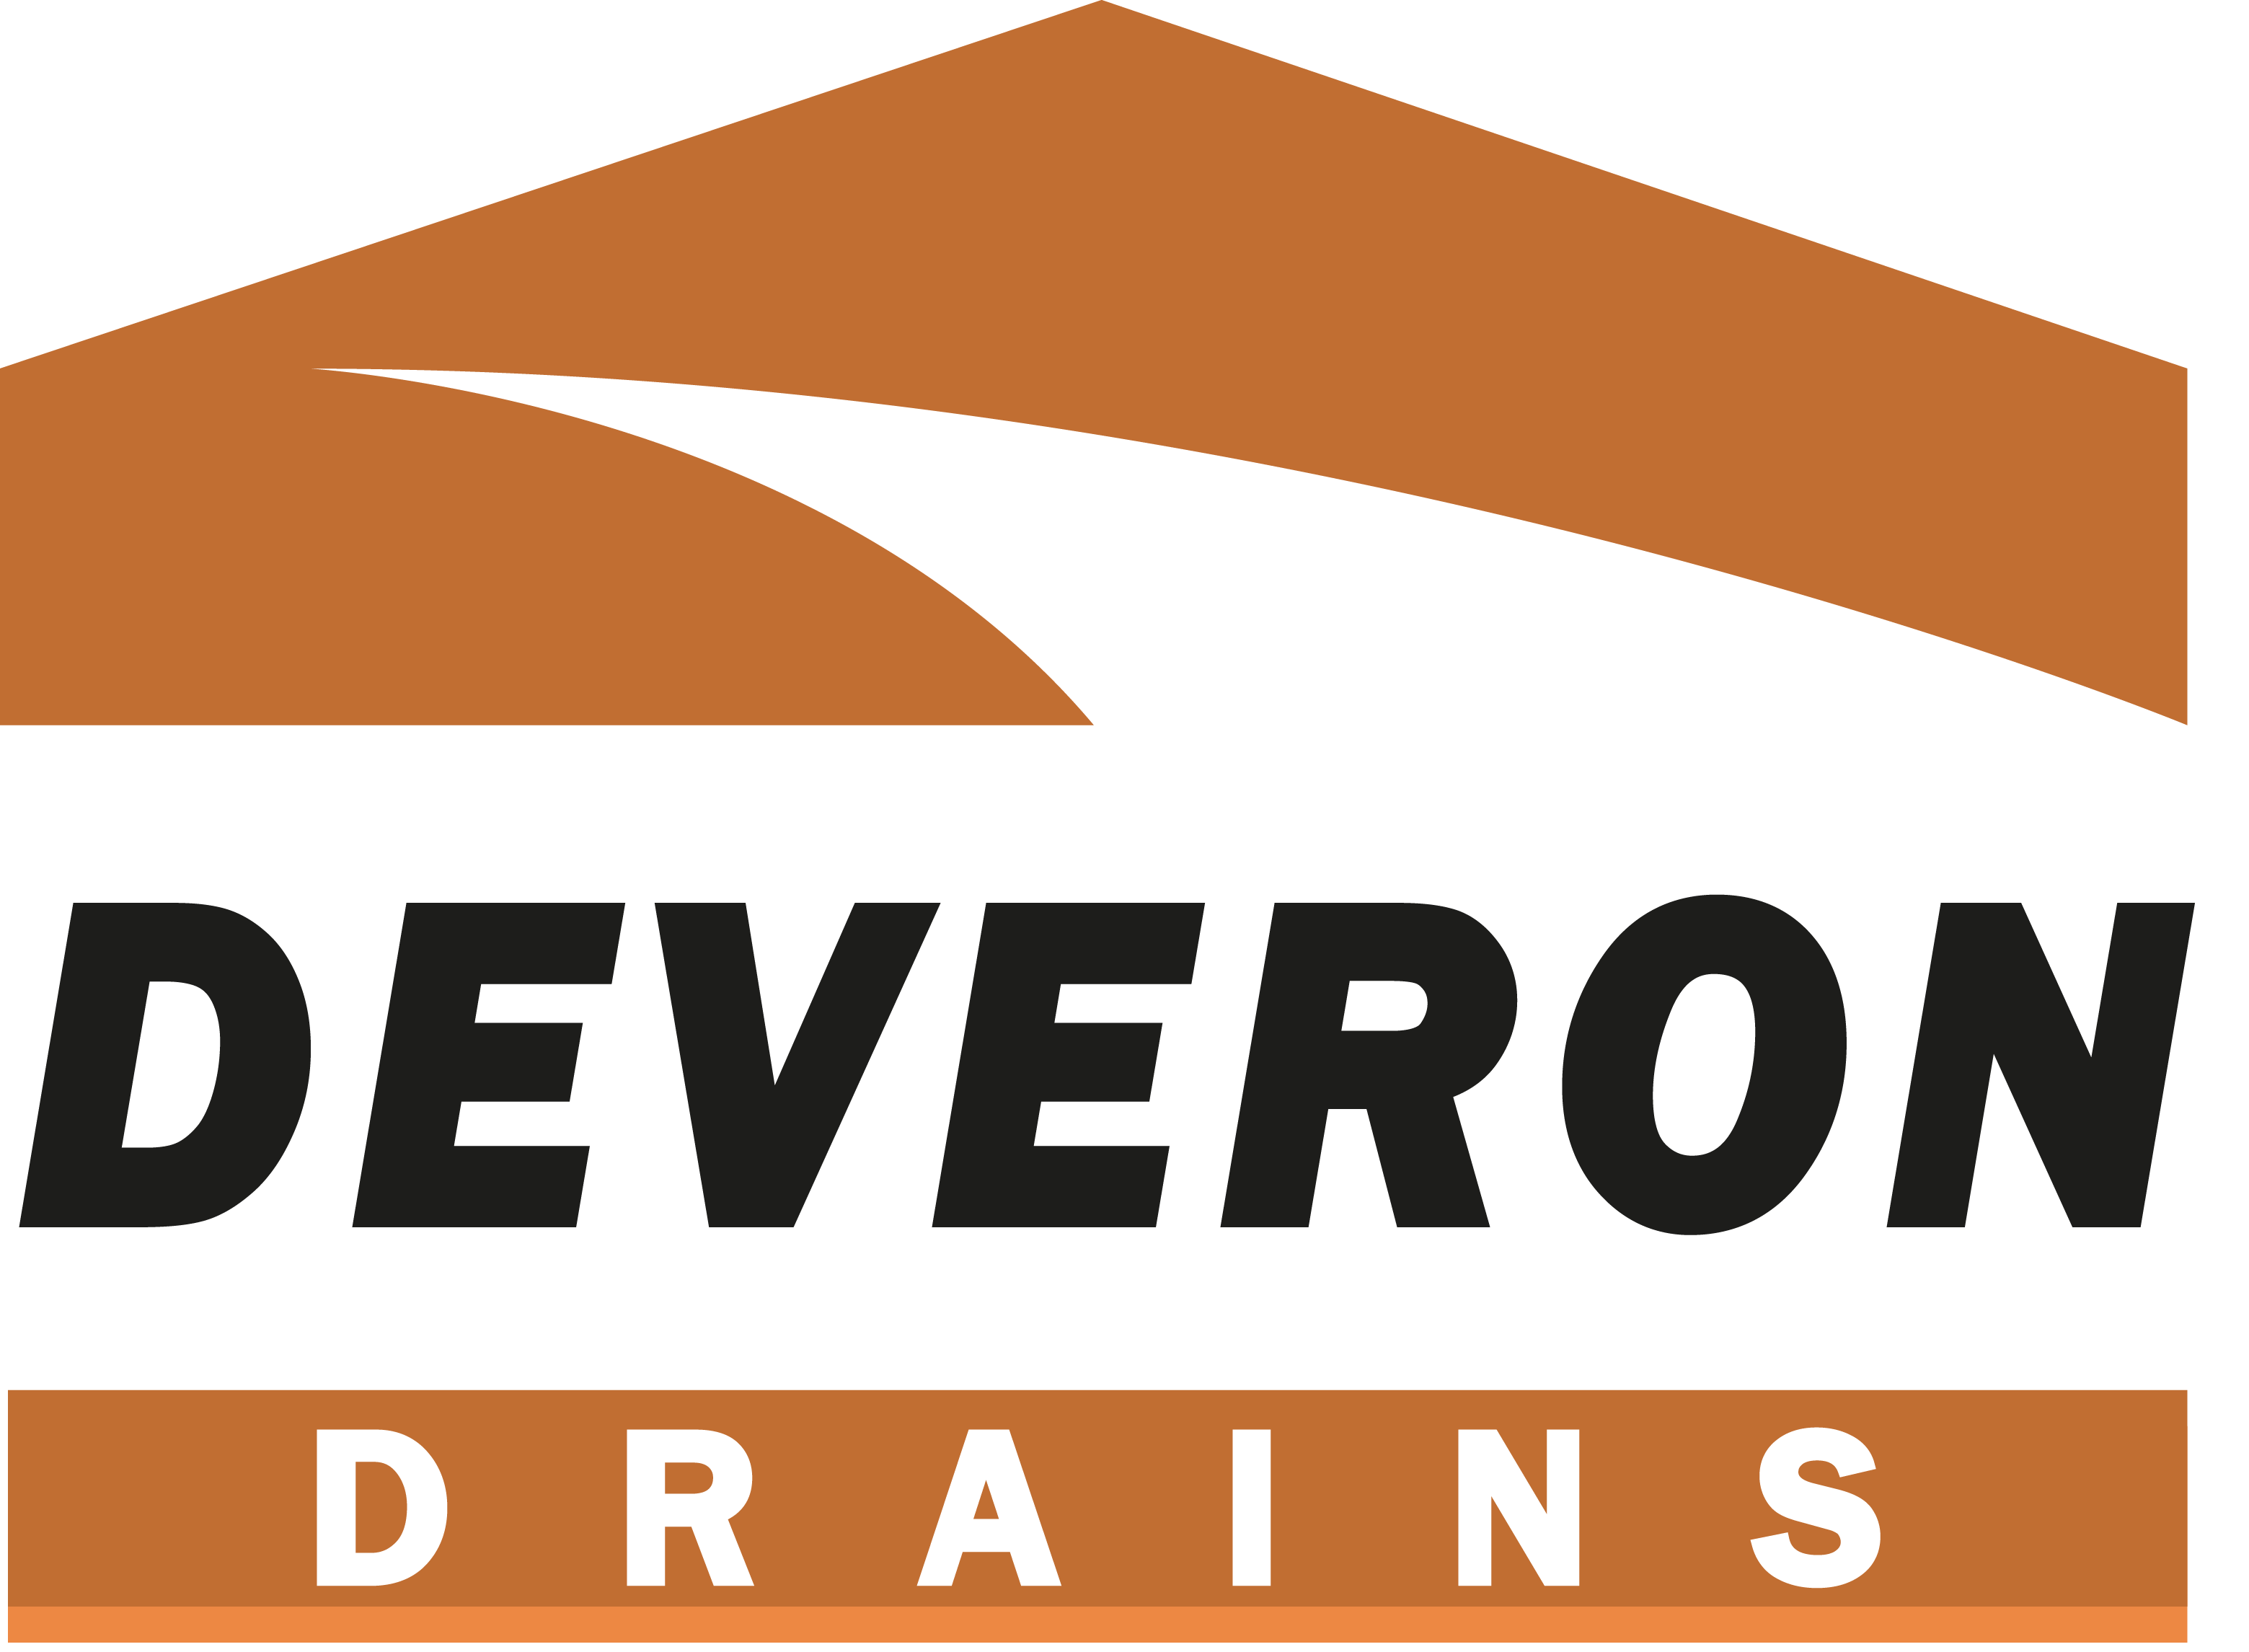 Drainage service in Aberdeen from Deveron Drains